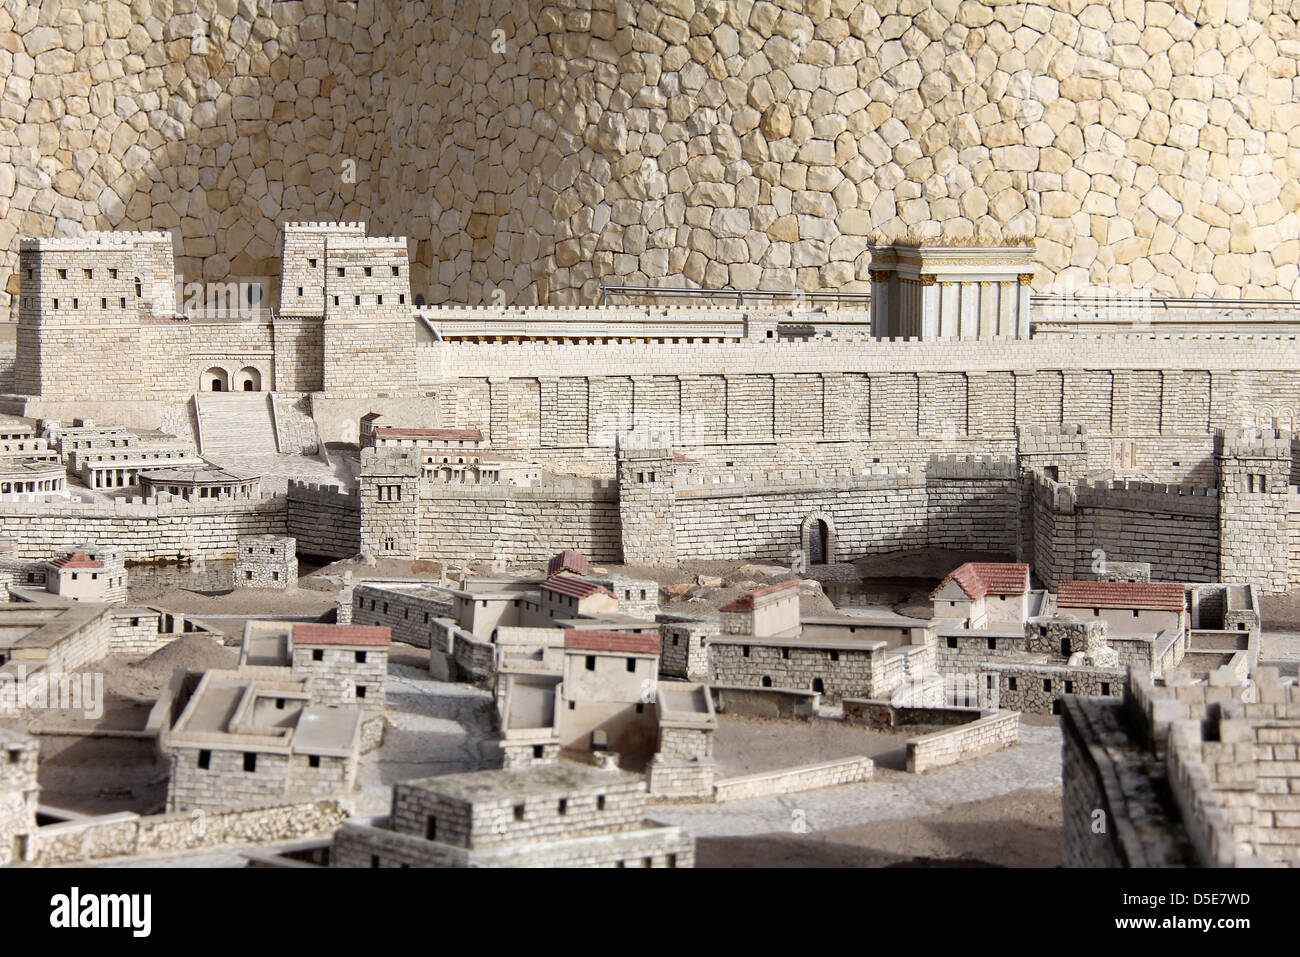 Second temple, Western wall, Anthony's fortress in ancient Jerusalem. Stock Photo